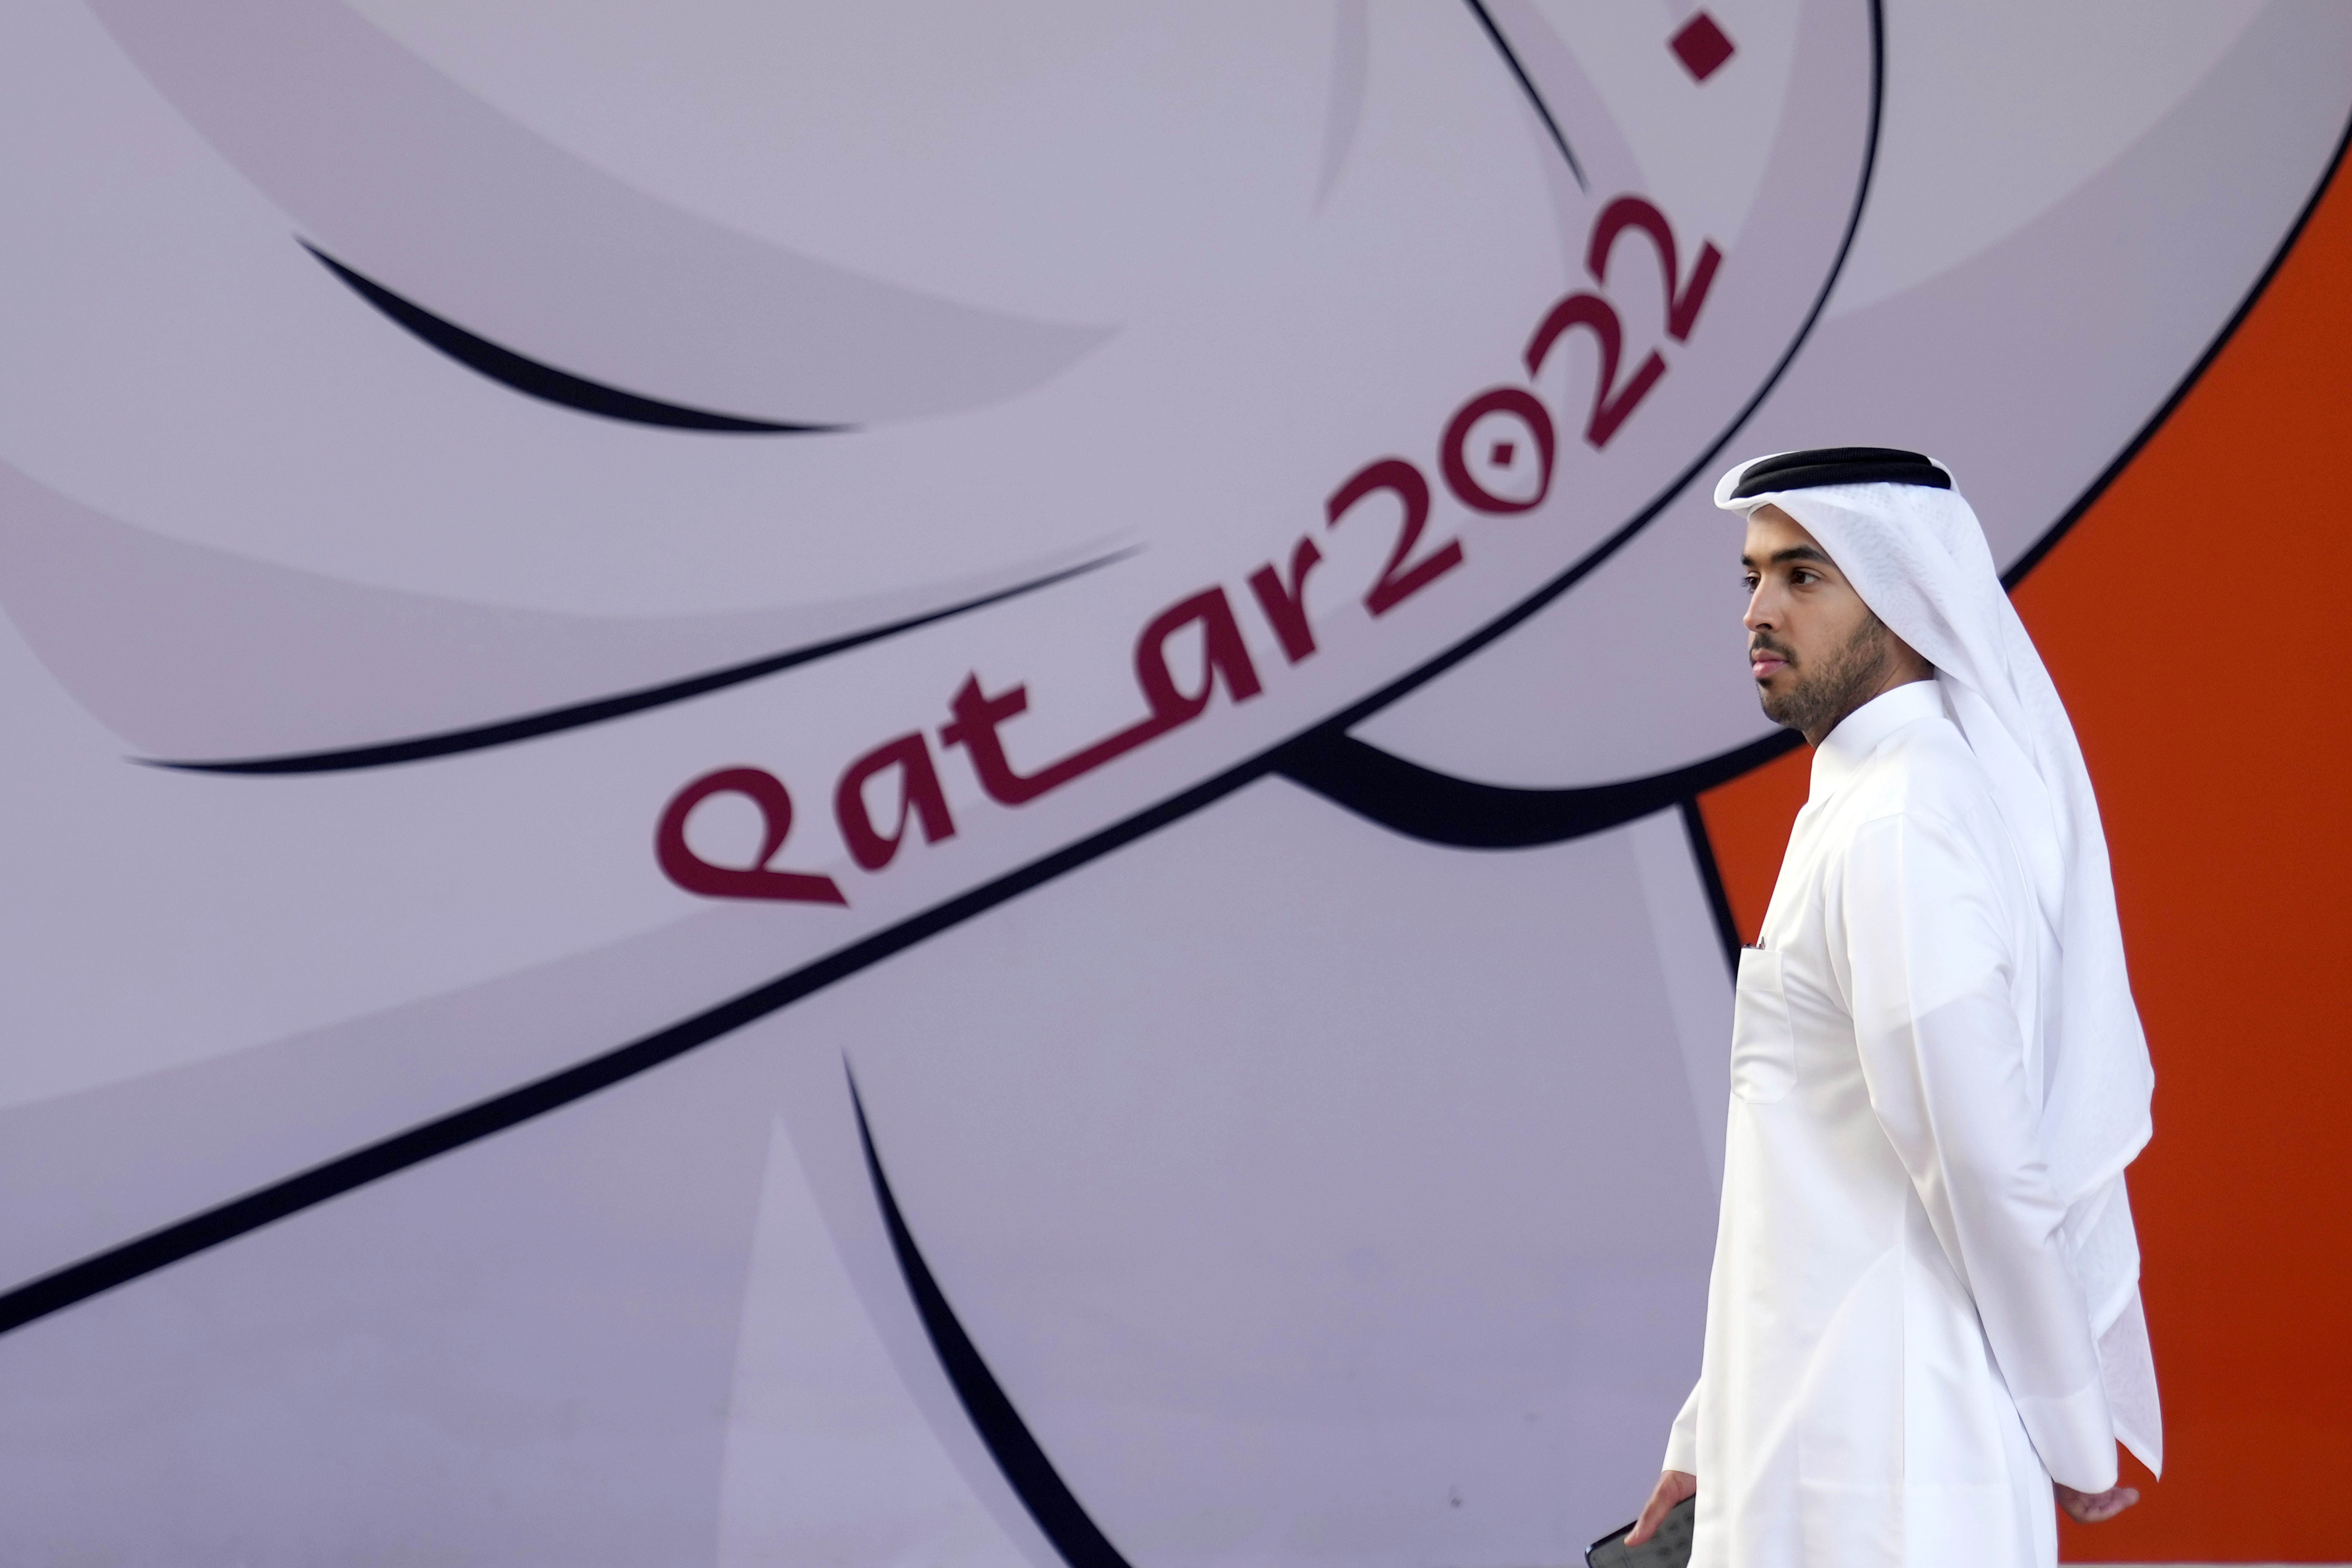 fifa world cup: What is Sportwashing? FIFA faces criticism as Qatar hosts  2022 World Cup - The Economic Times